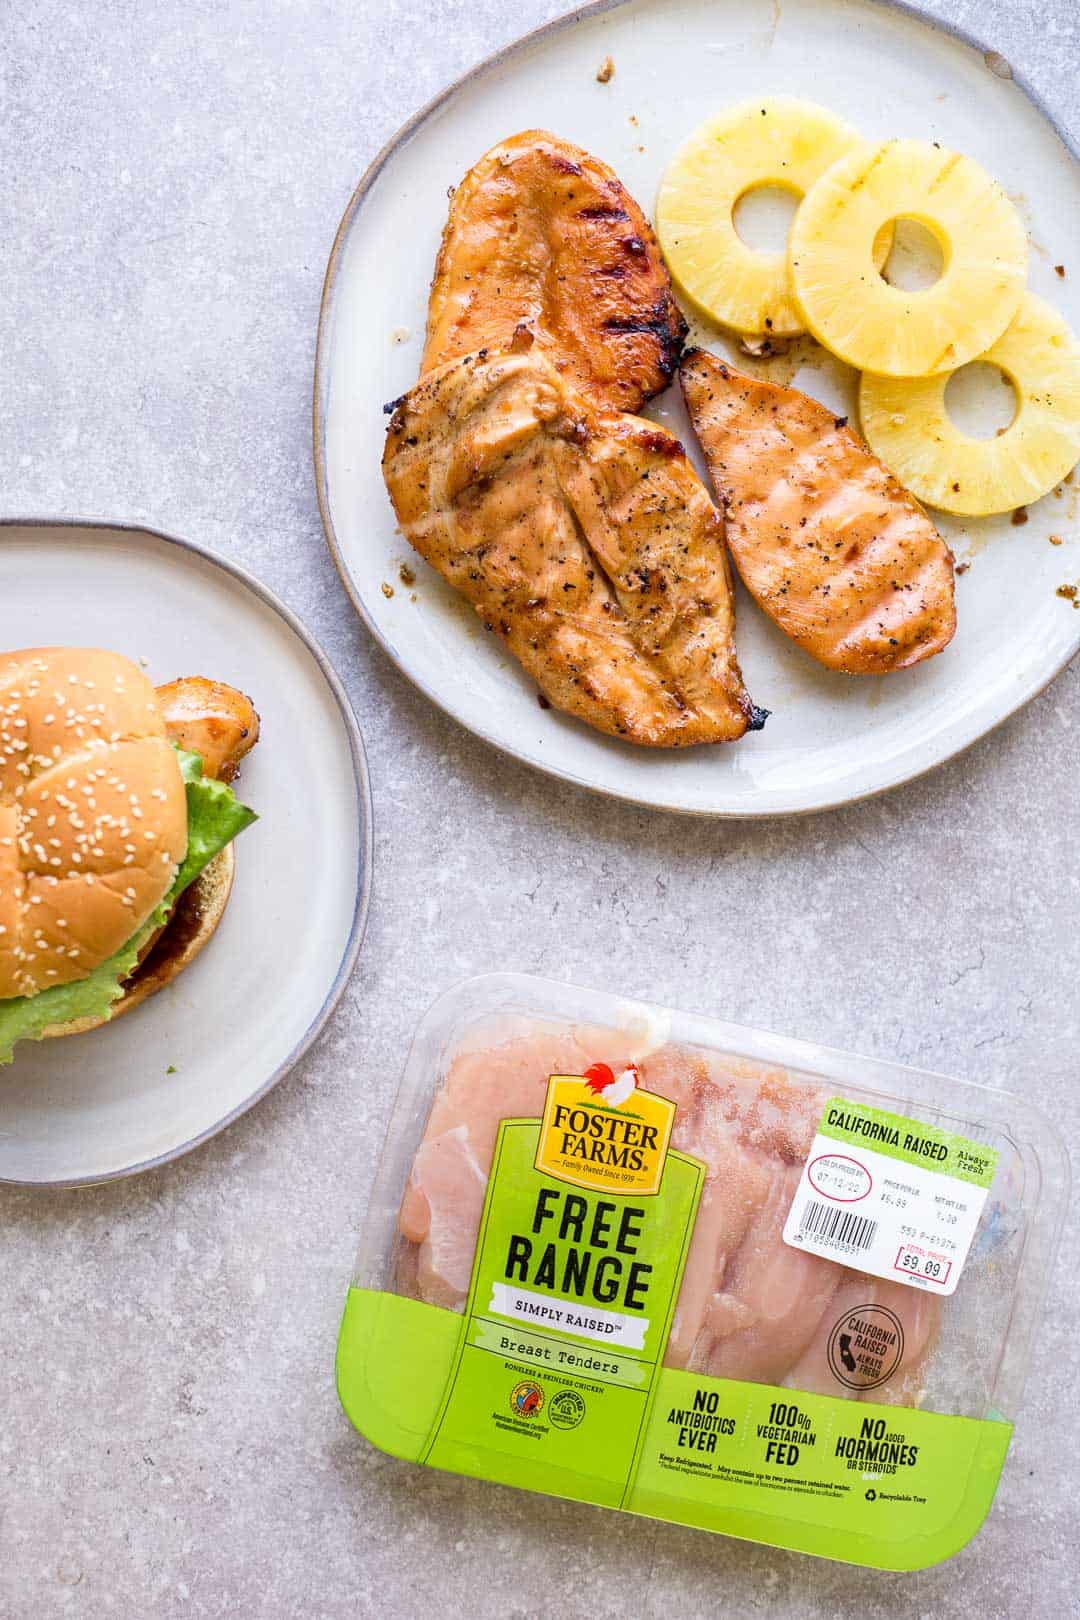 Grilled Teriyaki Chicken Burger next to a package Foster Farms Chicken Breasts